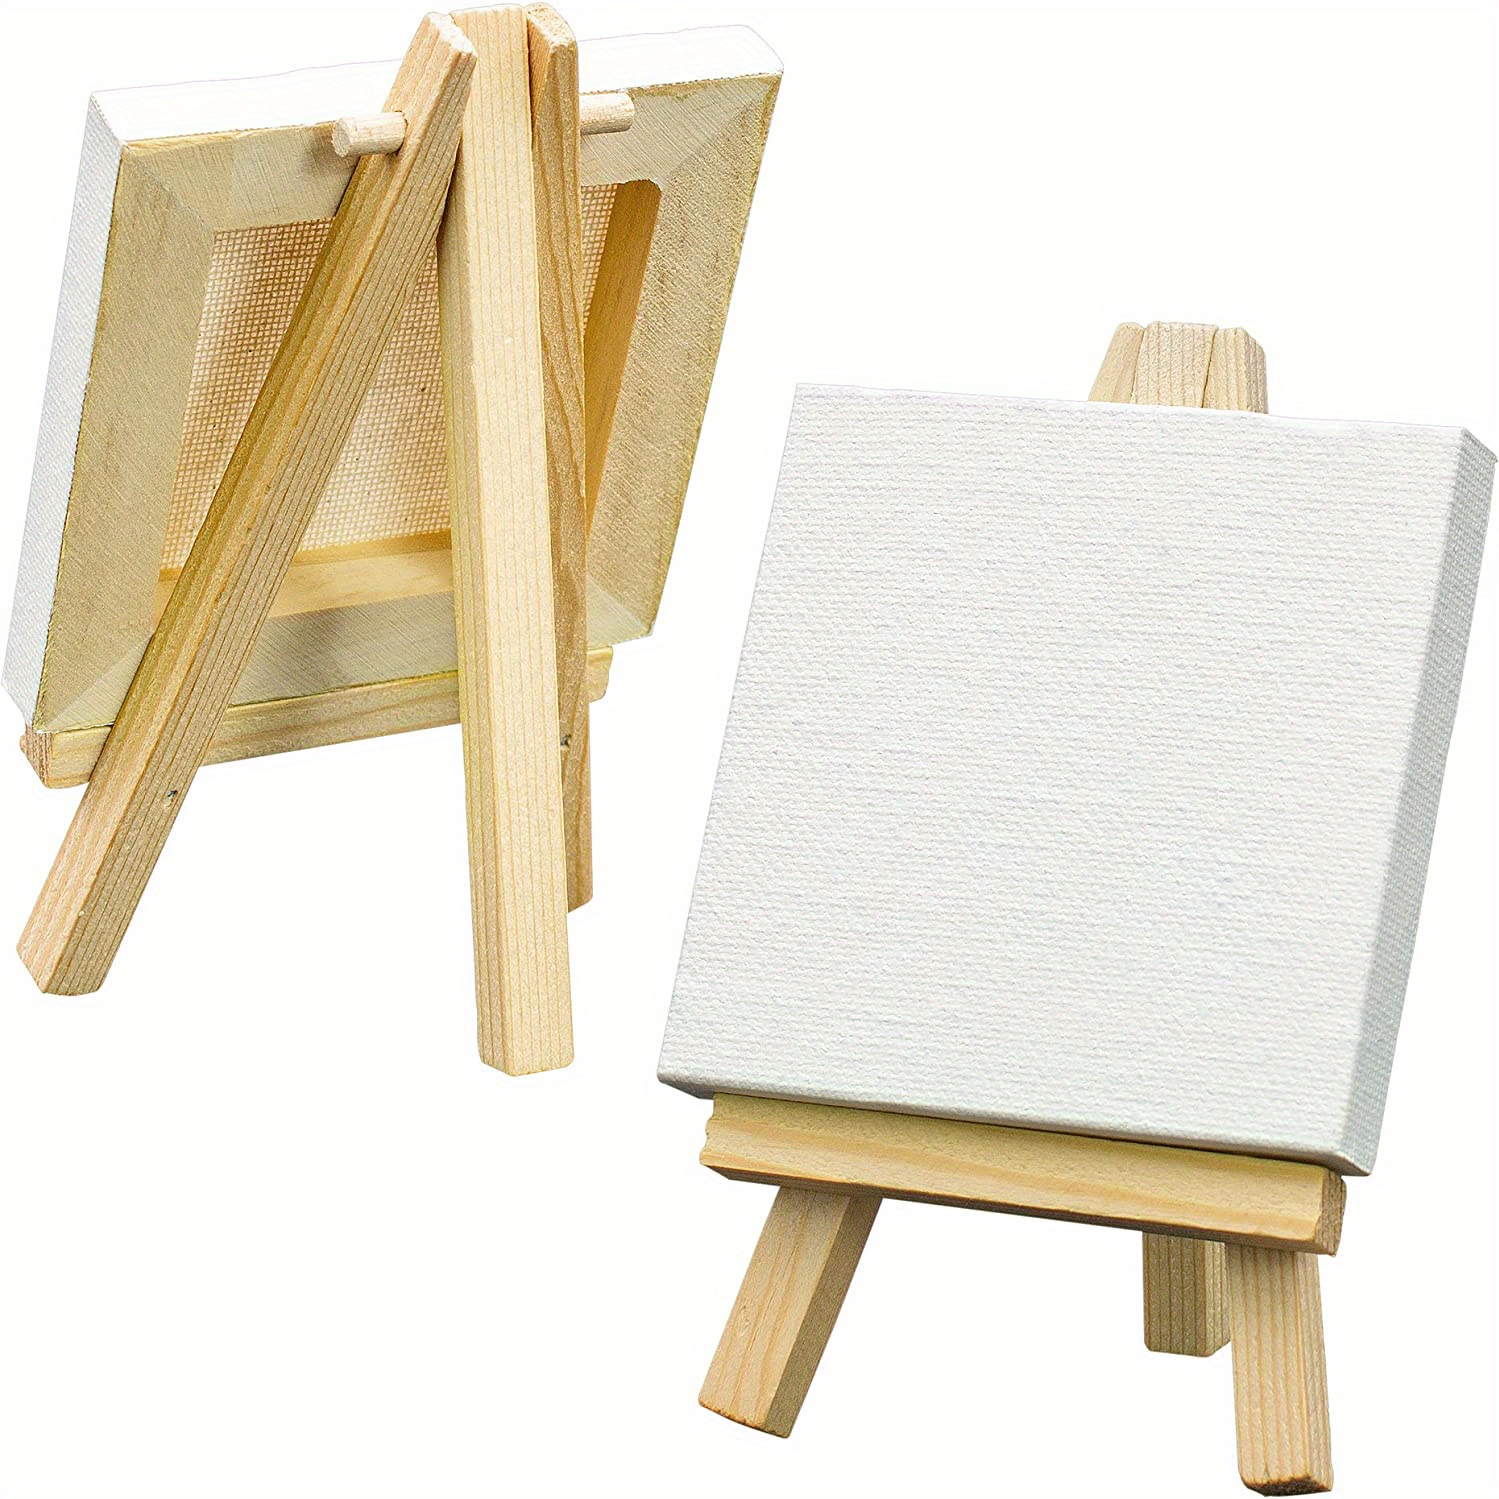 Desktop Mini Canvases with Easel, 4 x4 Inches Small Canvas for Painting, 9  Pack Tiny Canvases with Wooden Easel for Adults Kids, Art Supplies, Oil